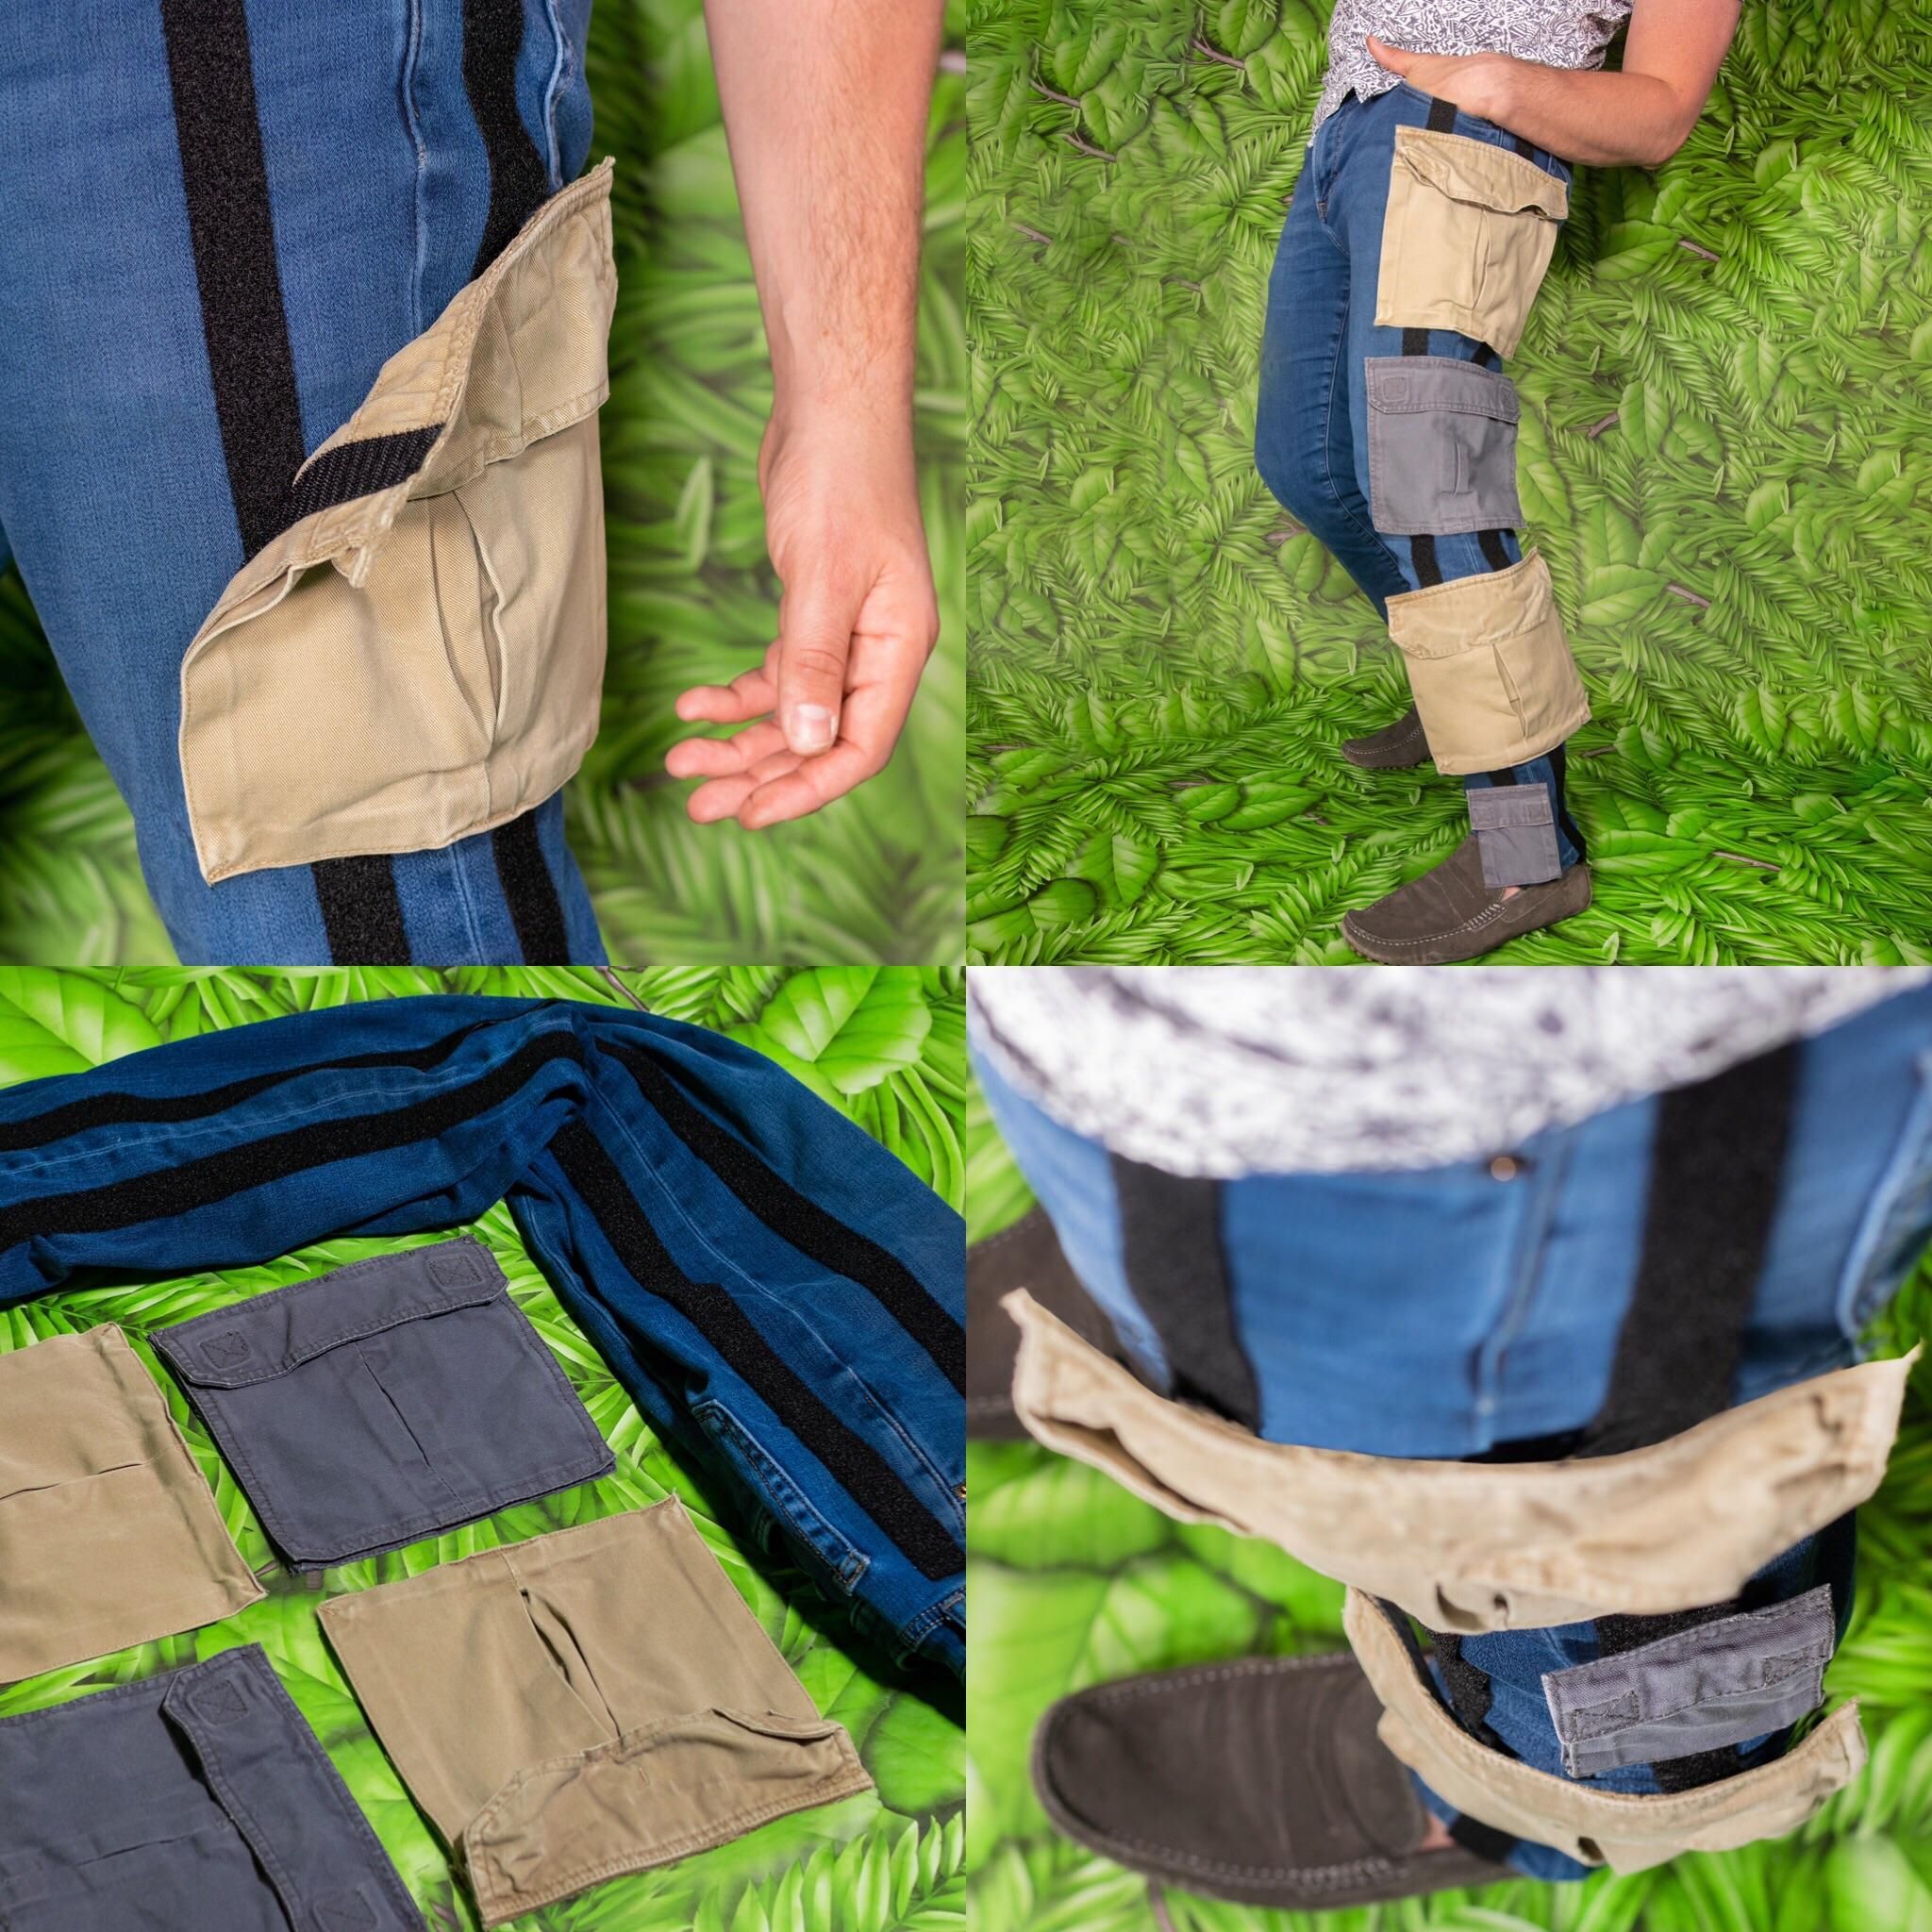 For fun I make myself fake products. The CargoMAX are the modular cargo pants. You can never have enough cargo pockets.